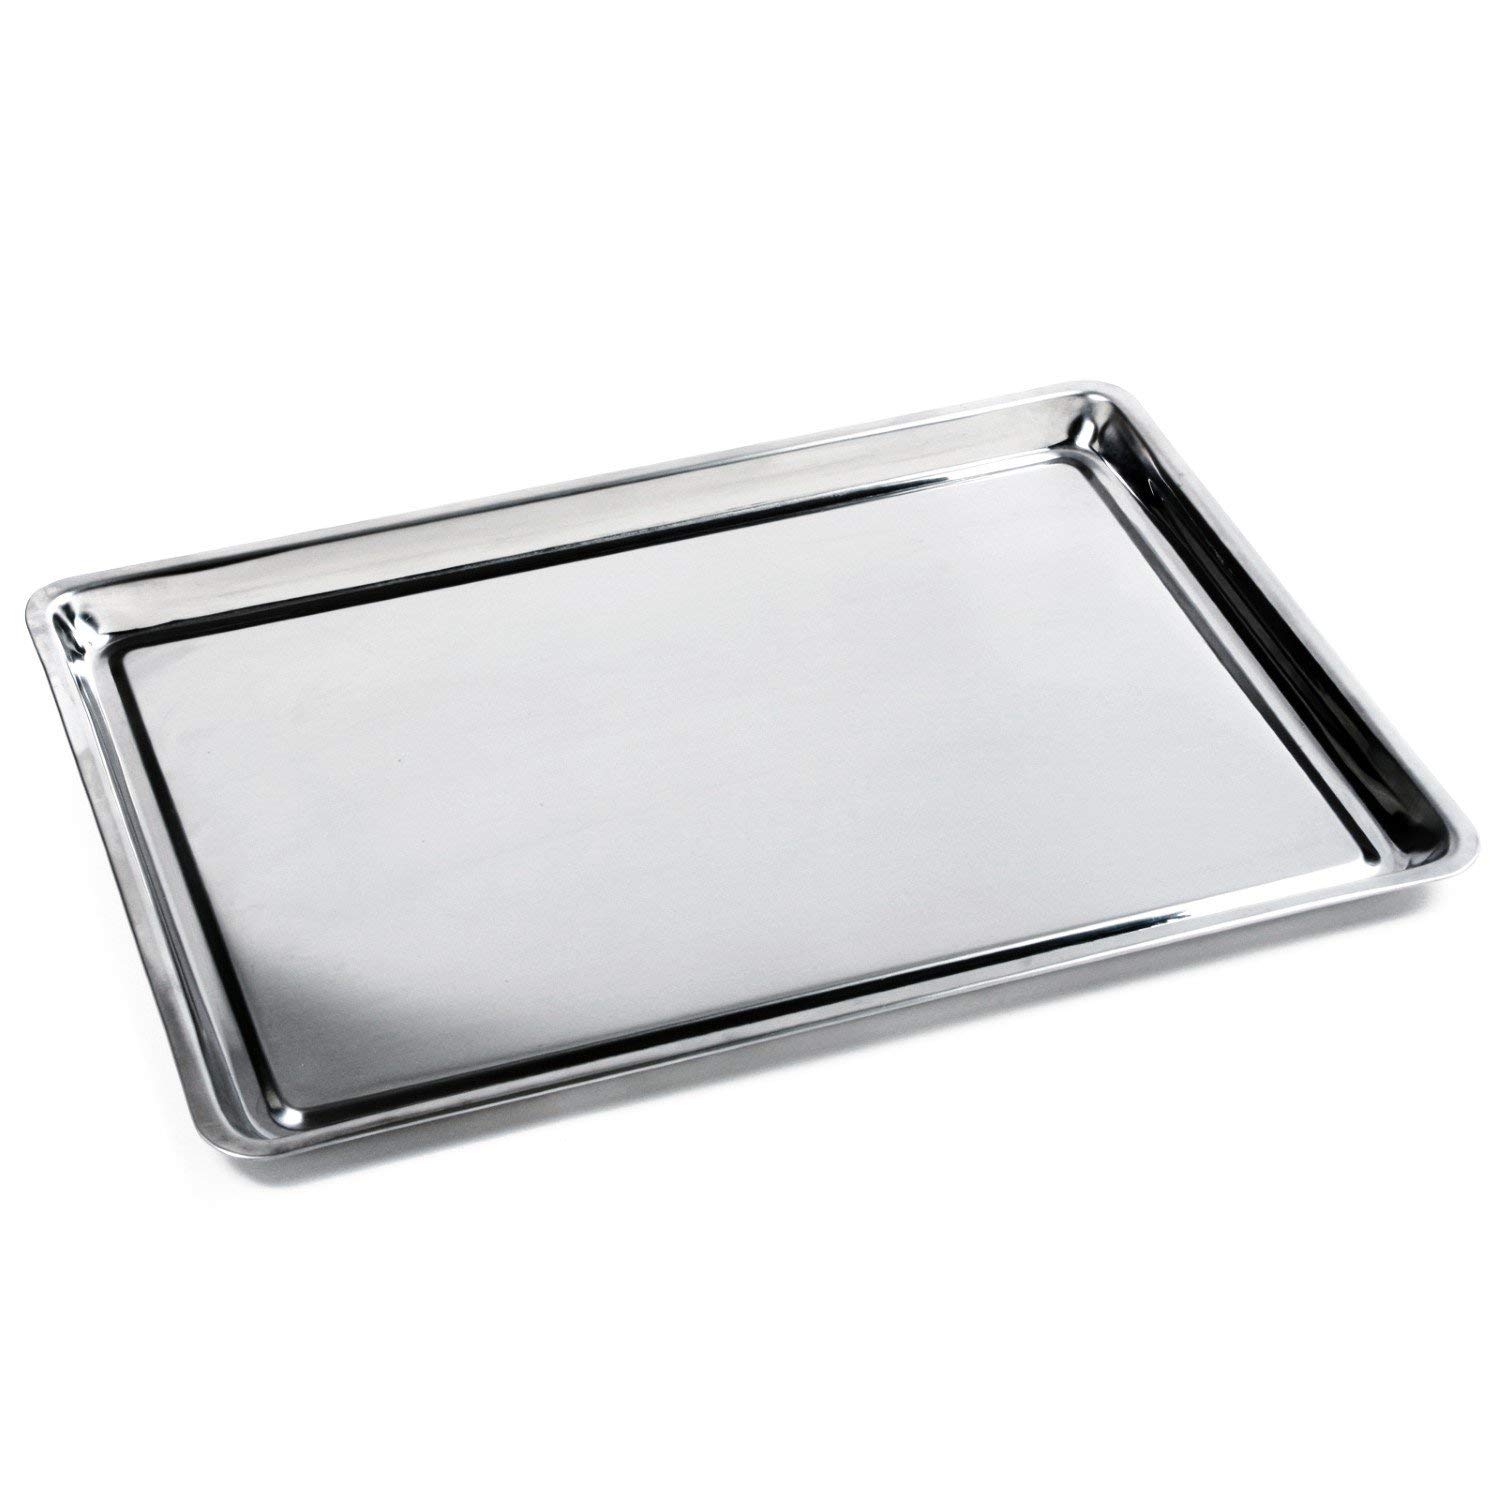 Norpro Stainless Steel Jelly Roll Baking Pan 15 inches x 10 inches x 1 inches, Chrome